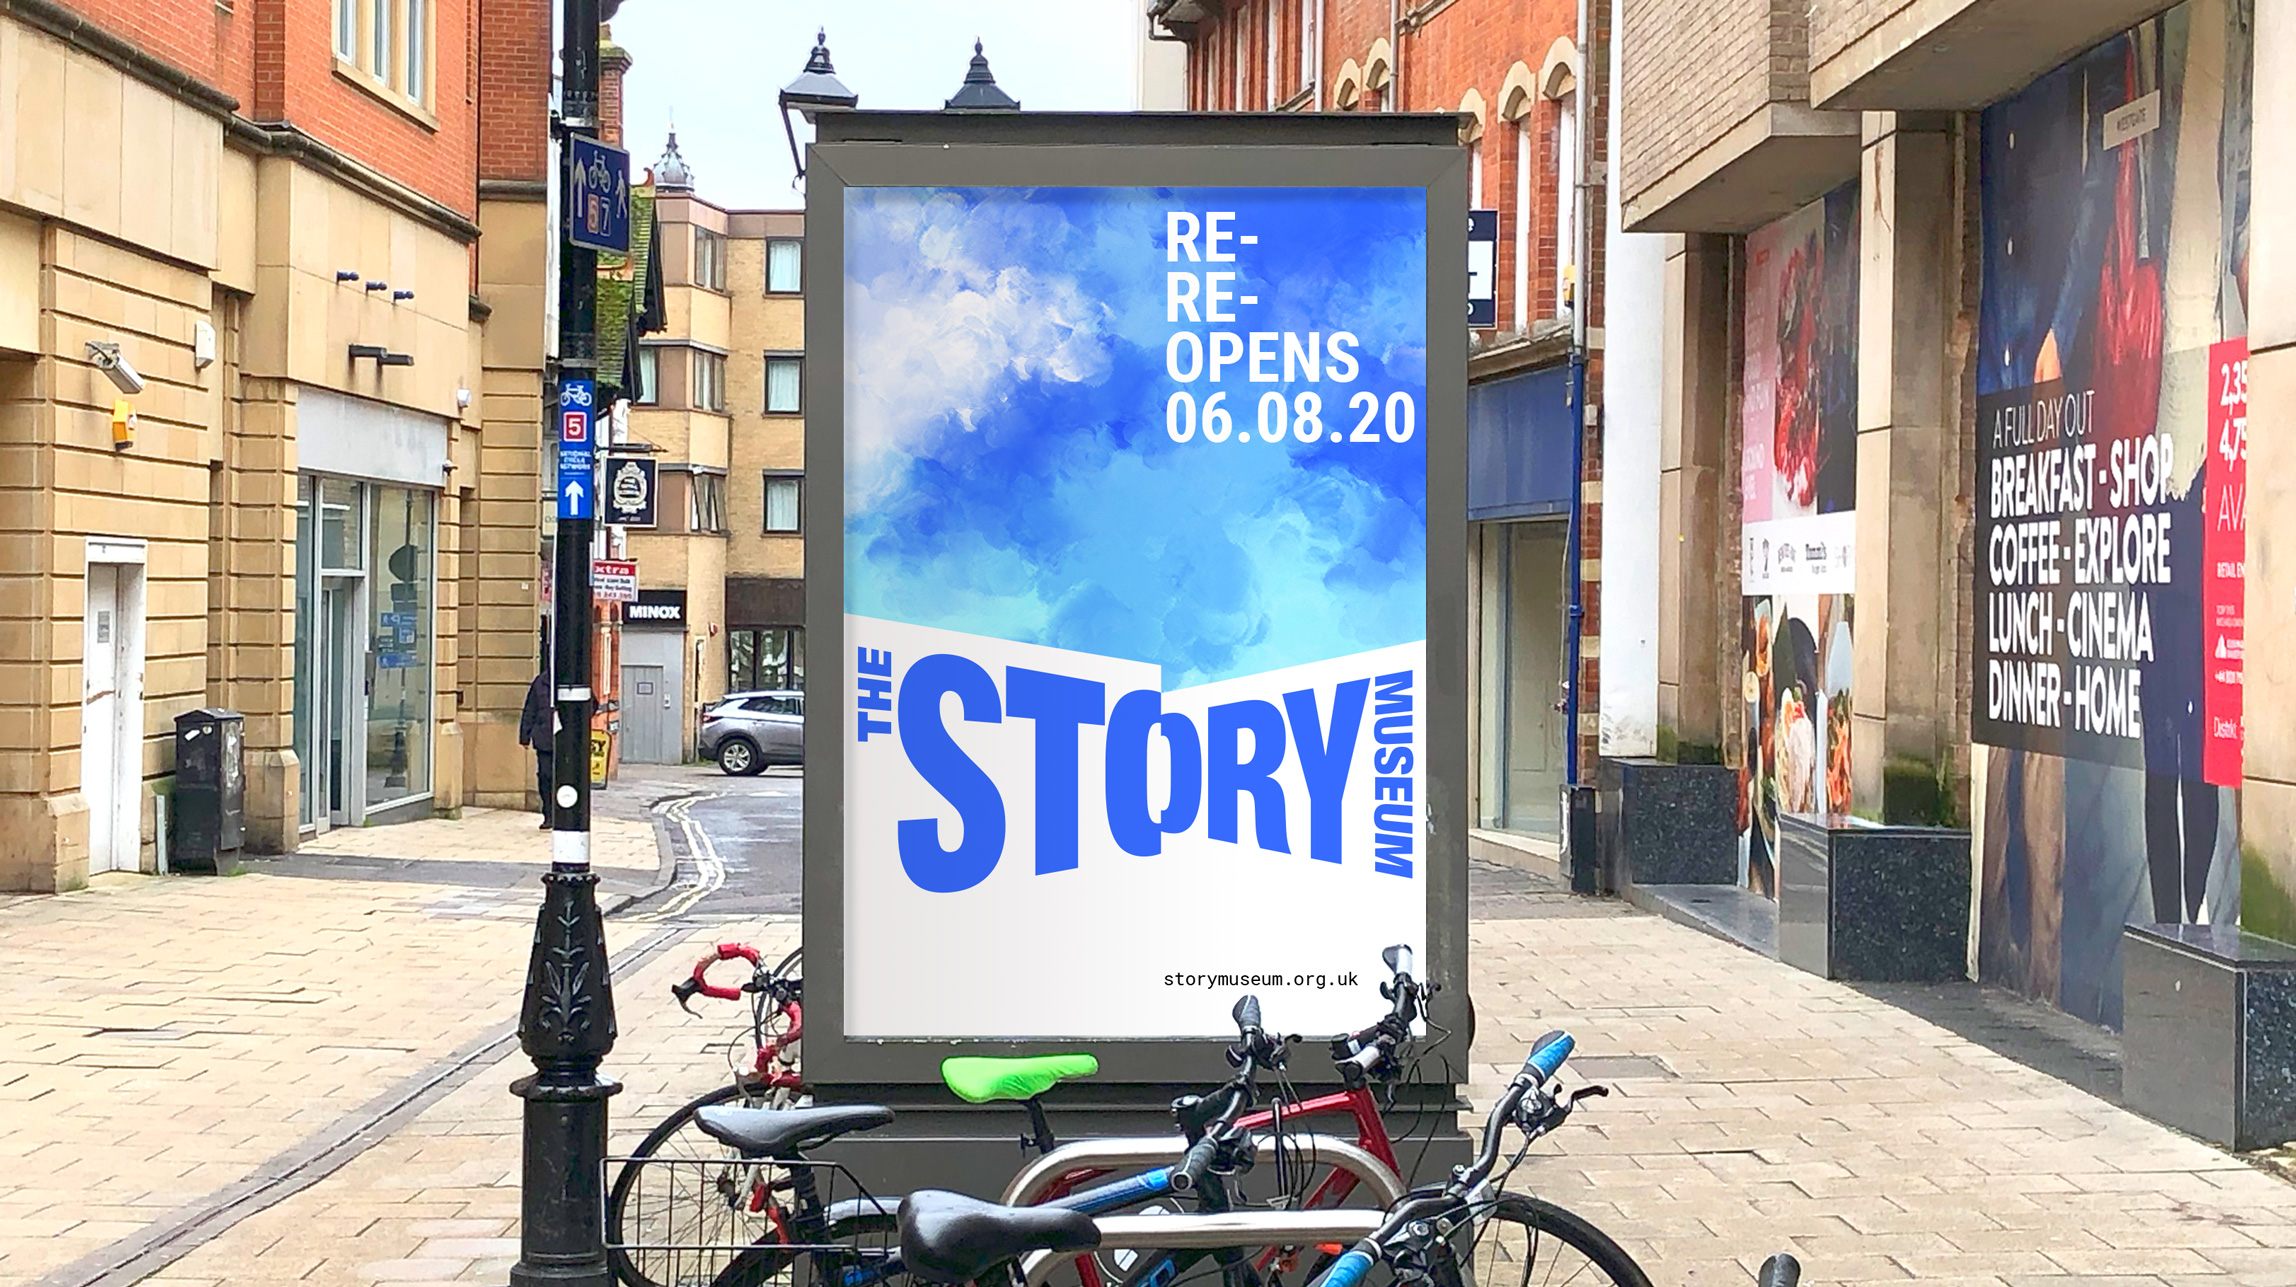 story museum oxford re-opening street poster